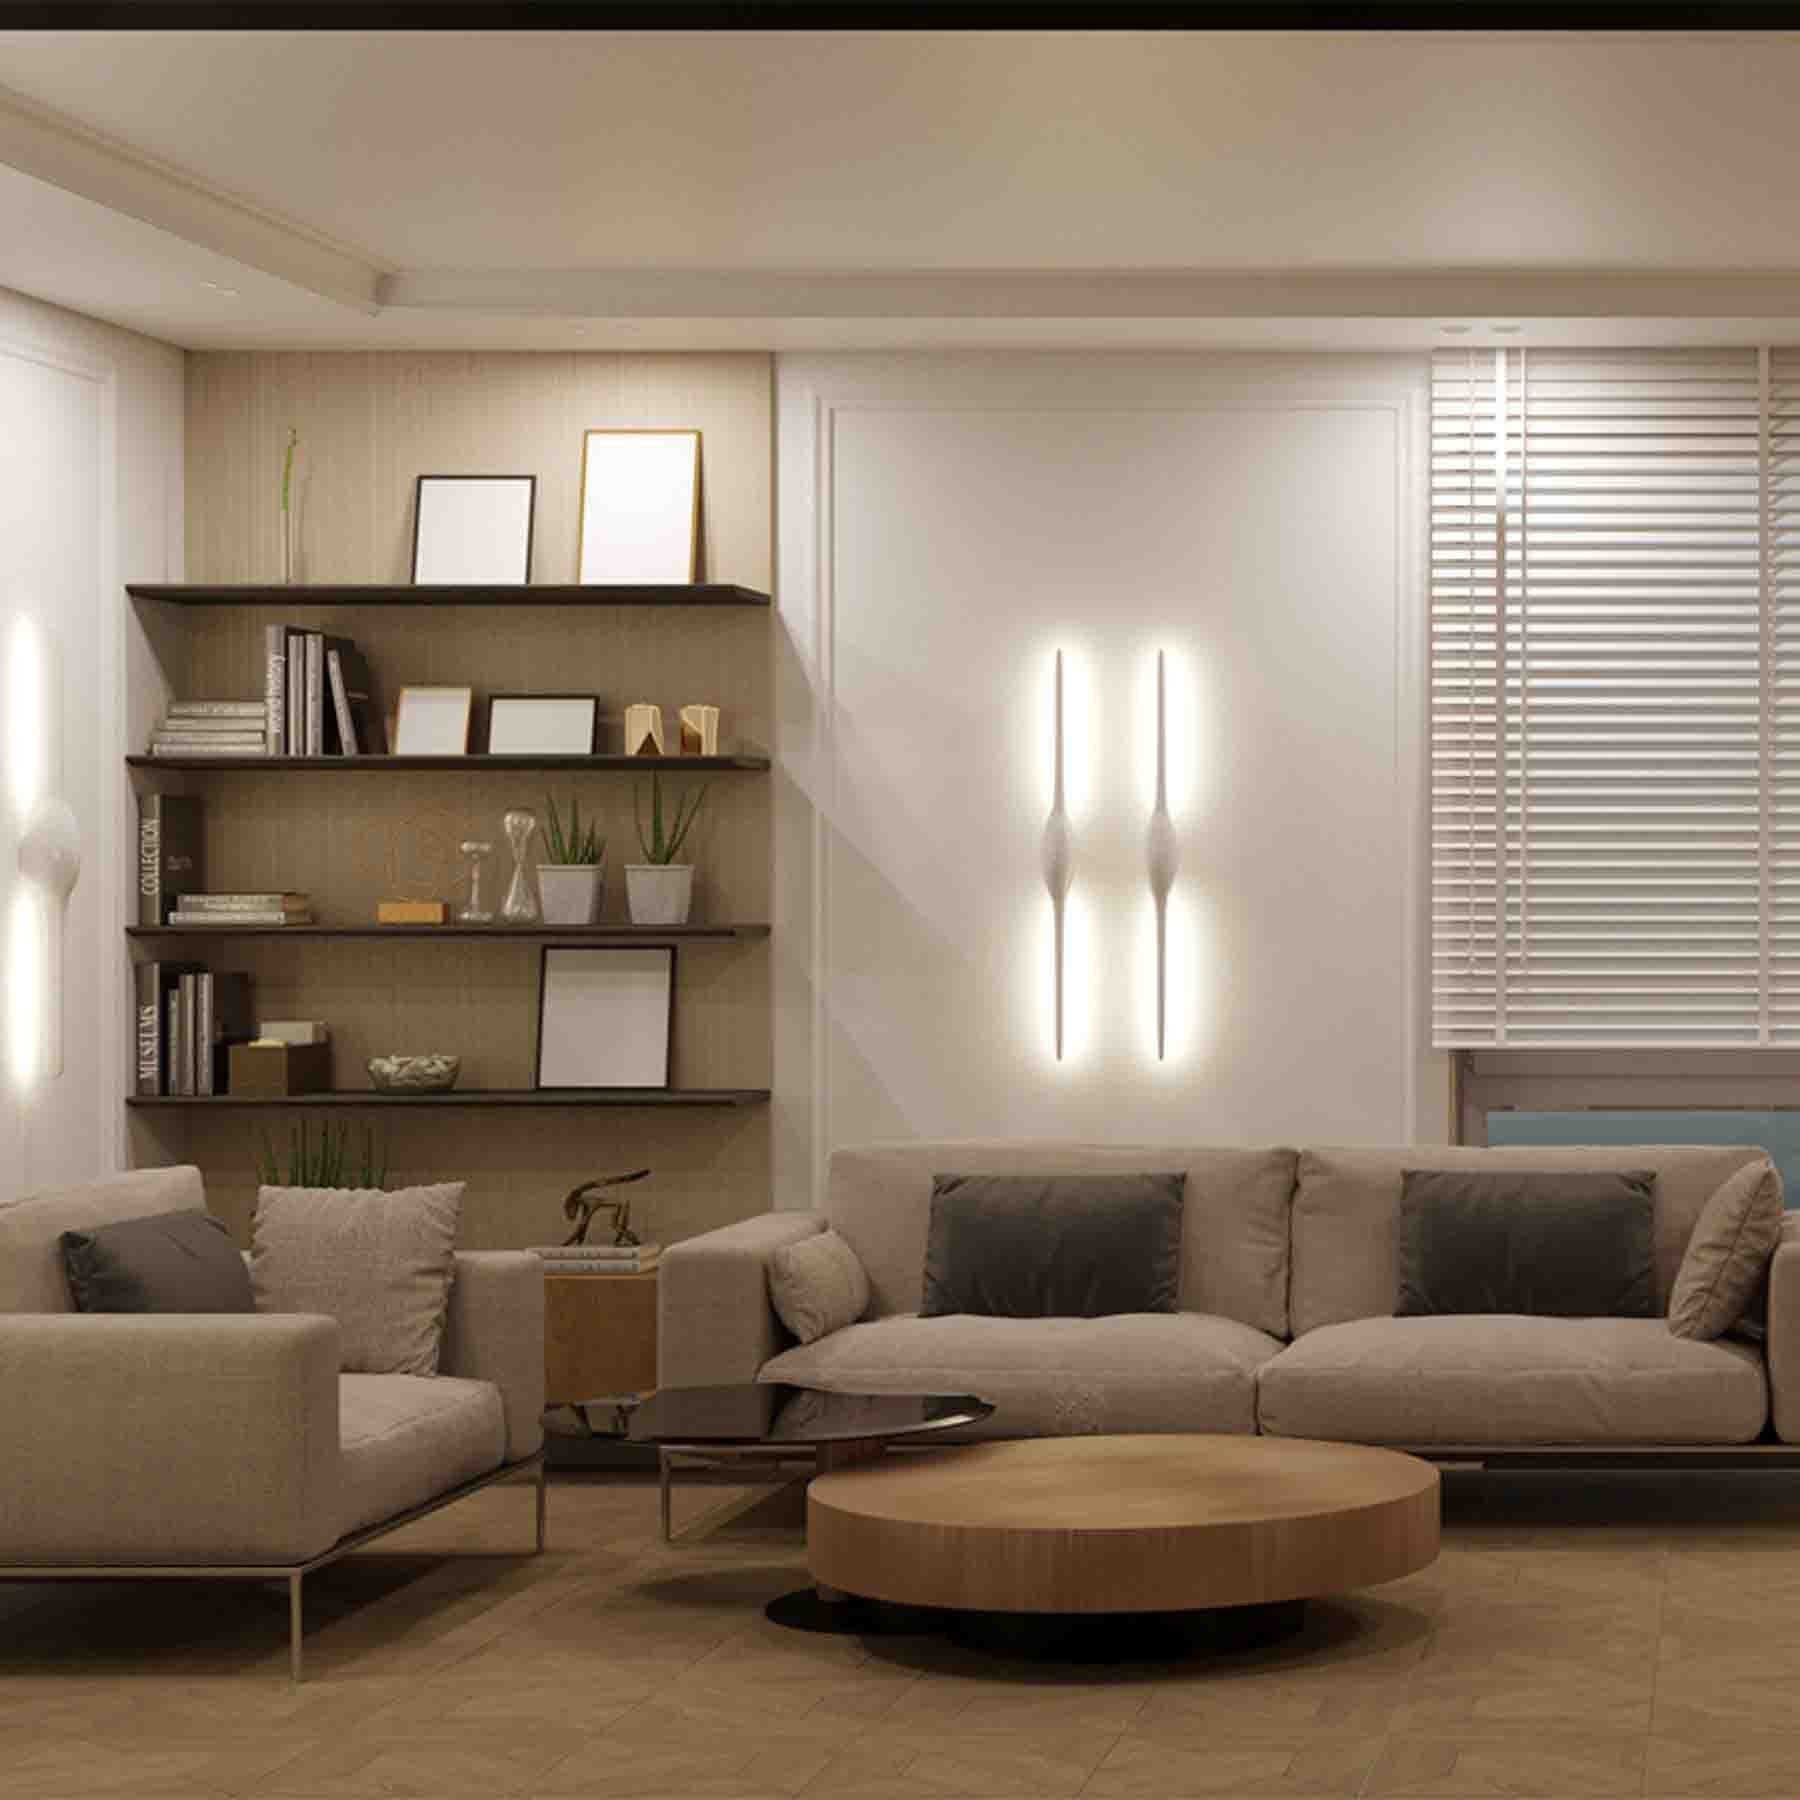 the living room offers ample space for the utilization of various led strips